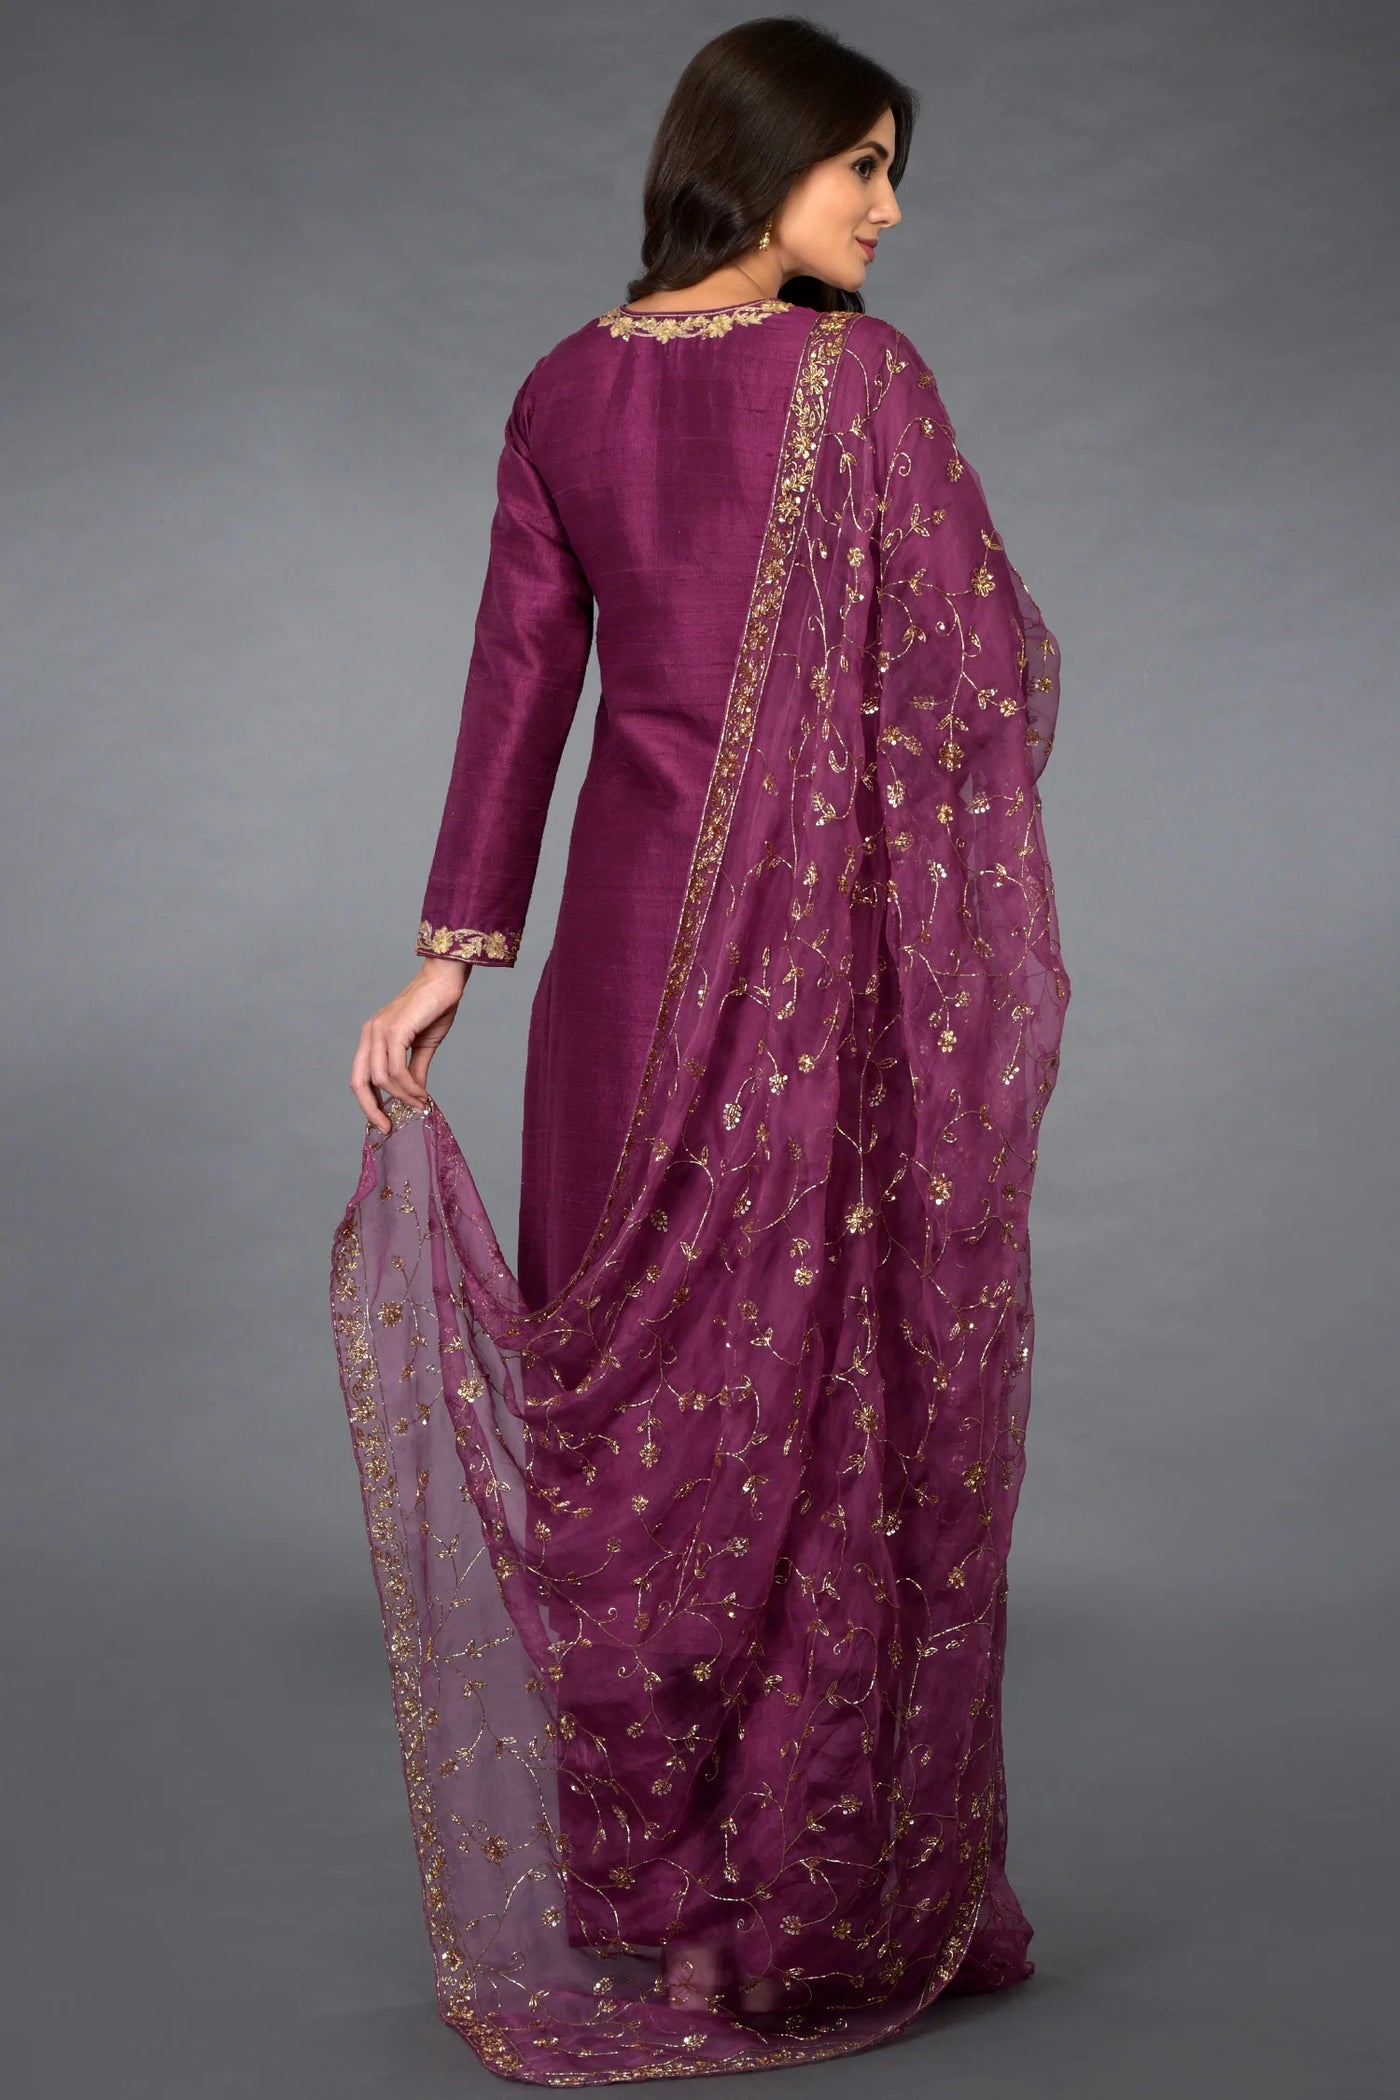 Purple Raw Silk Palazzo Set Indian Clothing in Denver, CO, Aurora, CO, Boulder, CO, Fort Collins, CO, Colorado Springs, CO, Parker, CO, Highlands Ranch, CO, Cherry Creek, CO, Centennial, CO, and Longmont, CO. NATIONWIDE SHIPPING USA- India Fashion X